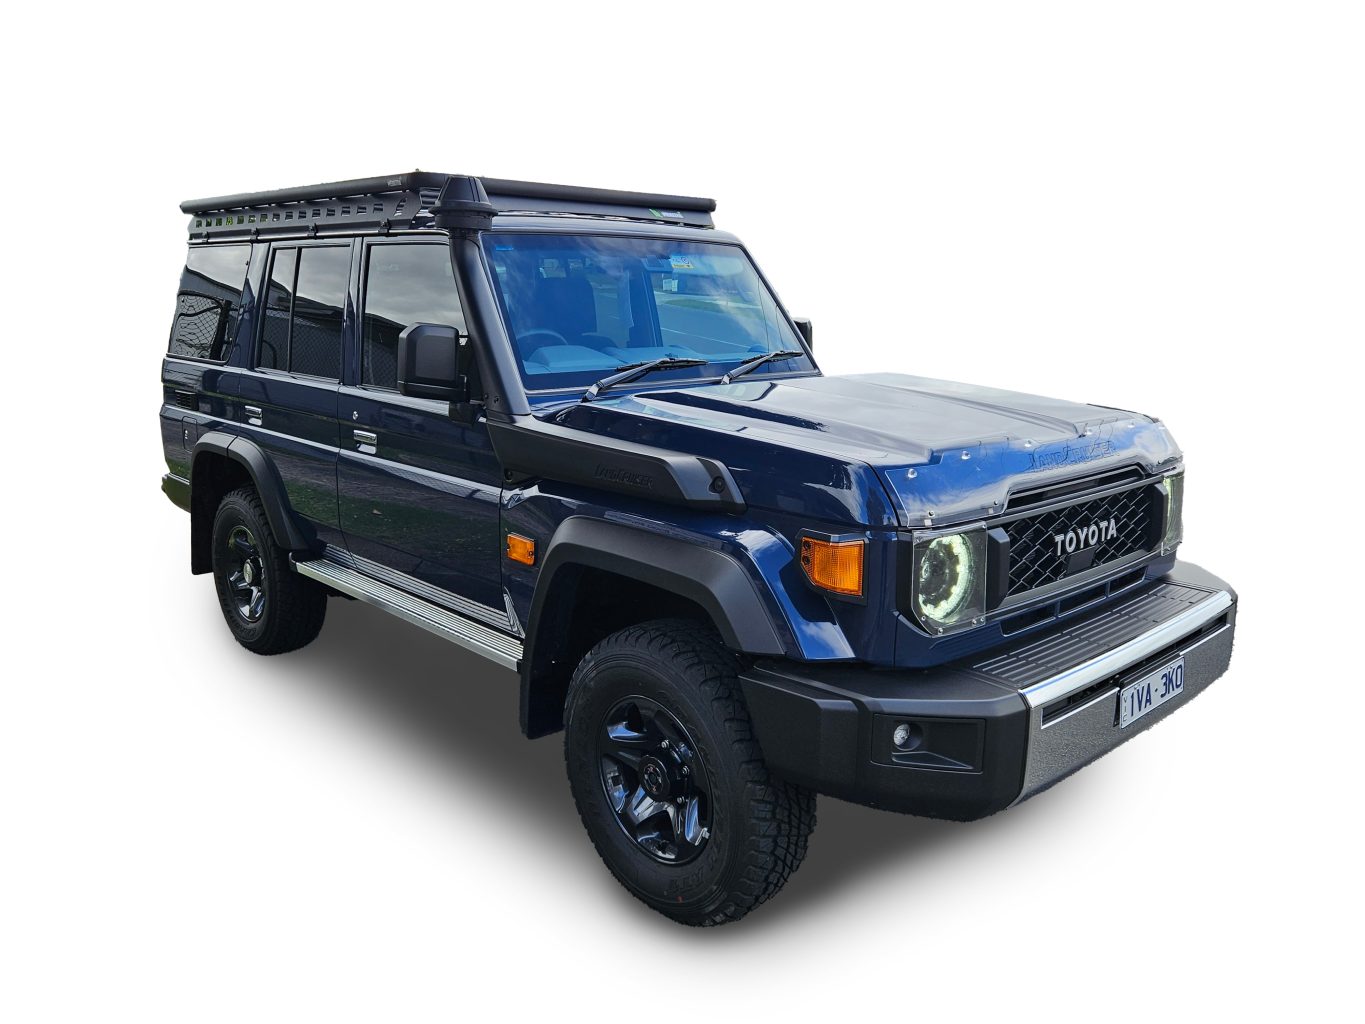 Toyota LandCruiser Troop Carrier 70 Series with a Wedgetail rack installed – Hero image.